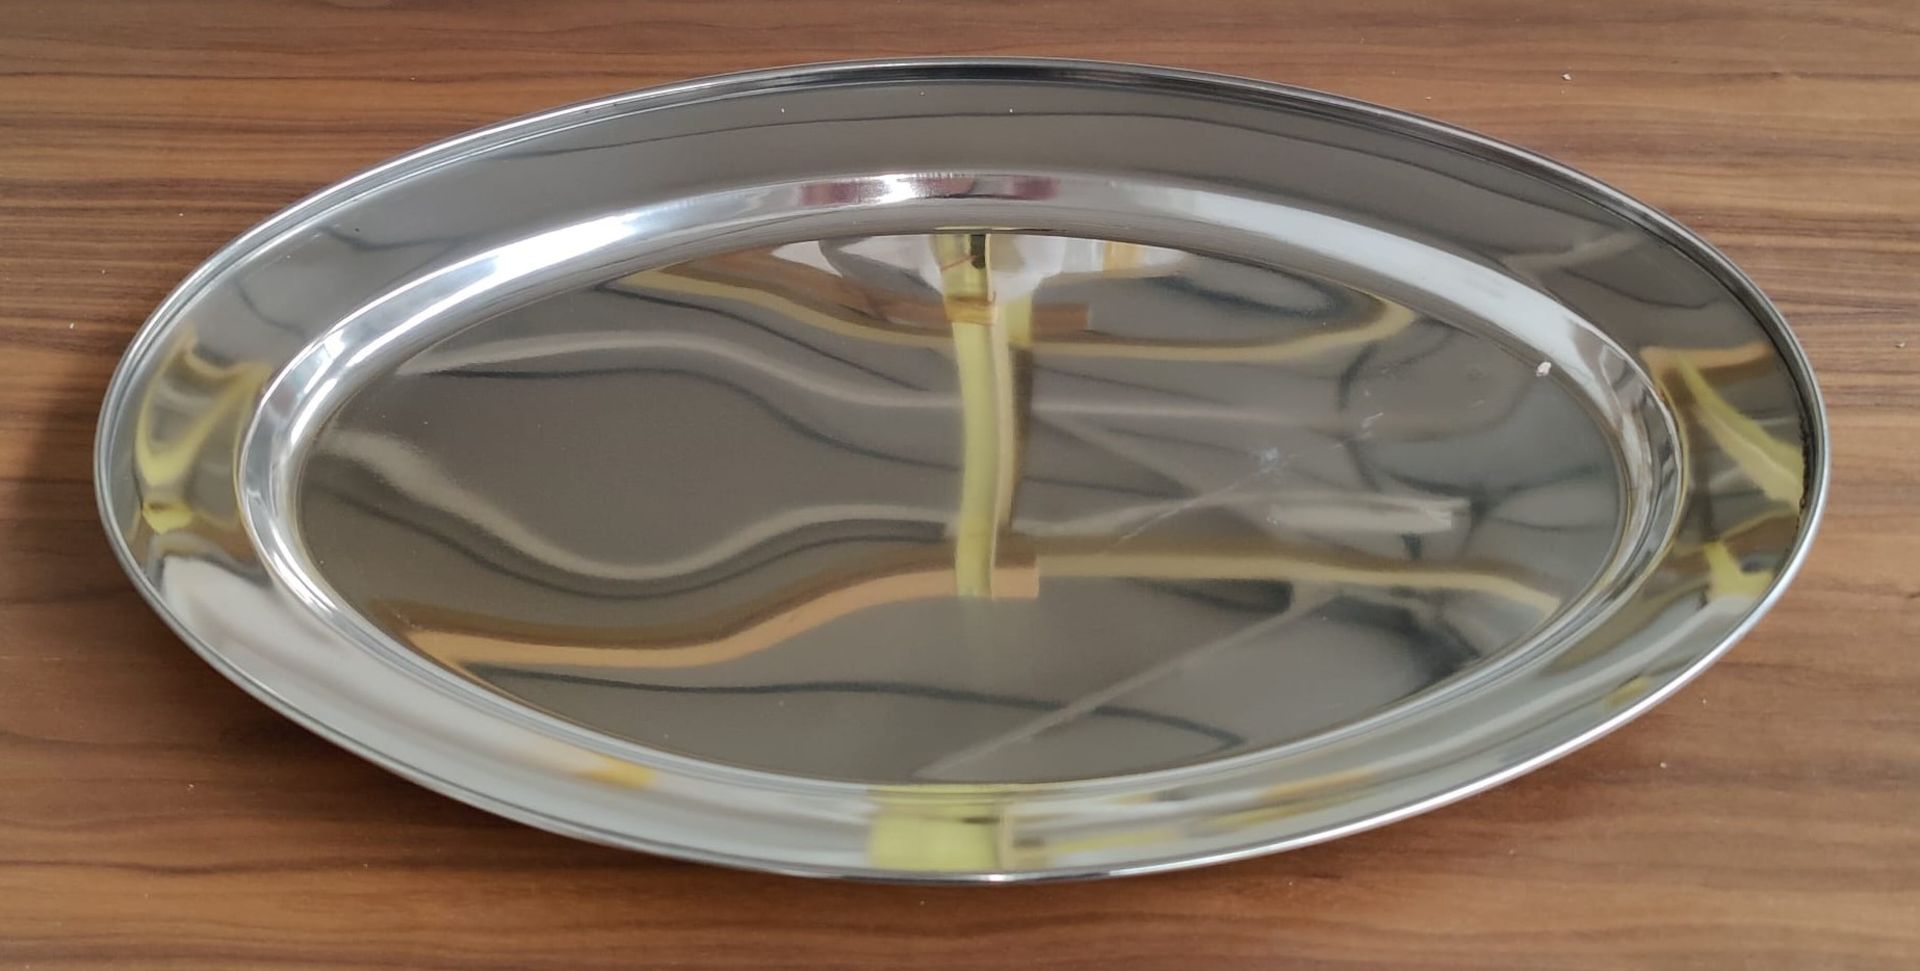 20 x Stainless Steel Oval Service Trays - Size: 450mm x 310mm - Brand New Boxed Stock - RRP £200 - Image 2 of 8